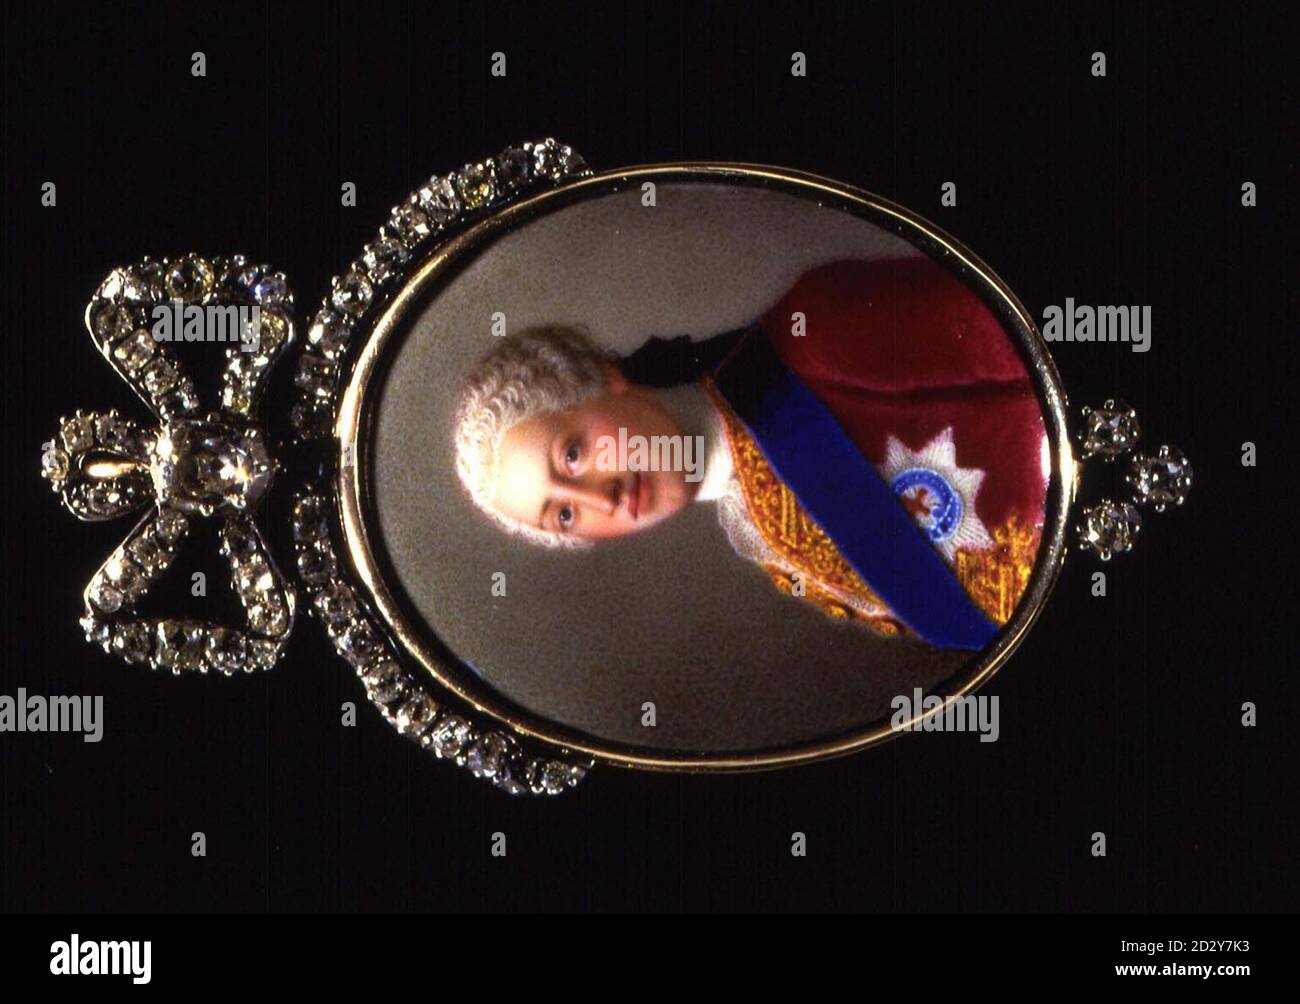 CORRECTED VERSION A newly discovered miniature of George III, as the Prince of Wales. The rare and exquisite enamel, one of only five recorded examples of miniatures painted by the 18th century   Swiss artist Jean-Etienne Liotard. The miniature fetch  128,000 at Christie's in London today (Tuesday), more than  double the estimated value. Watch for  PA Photos. Stock Photo